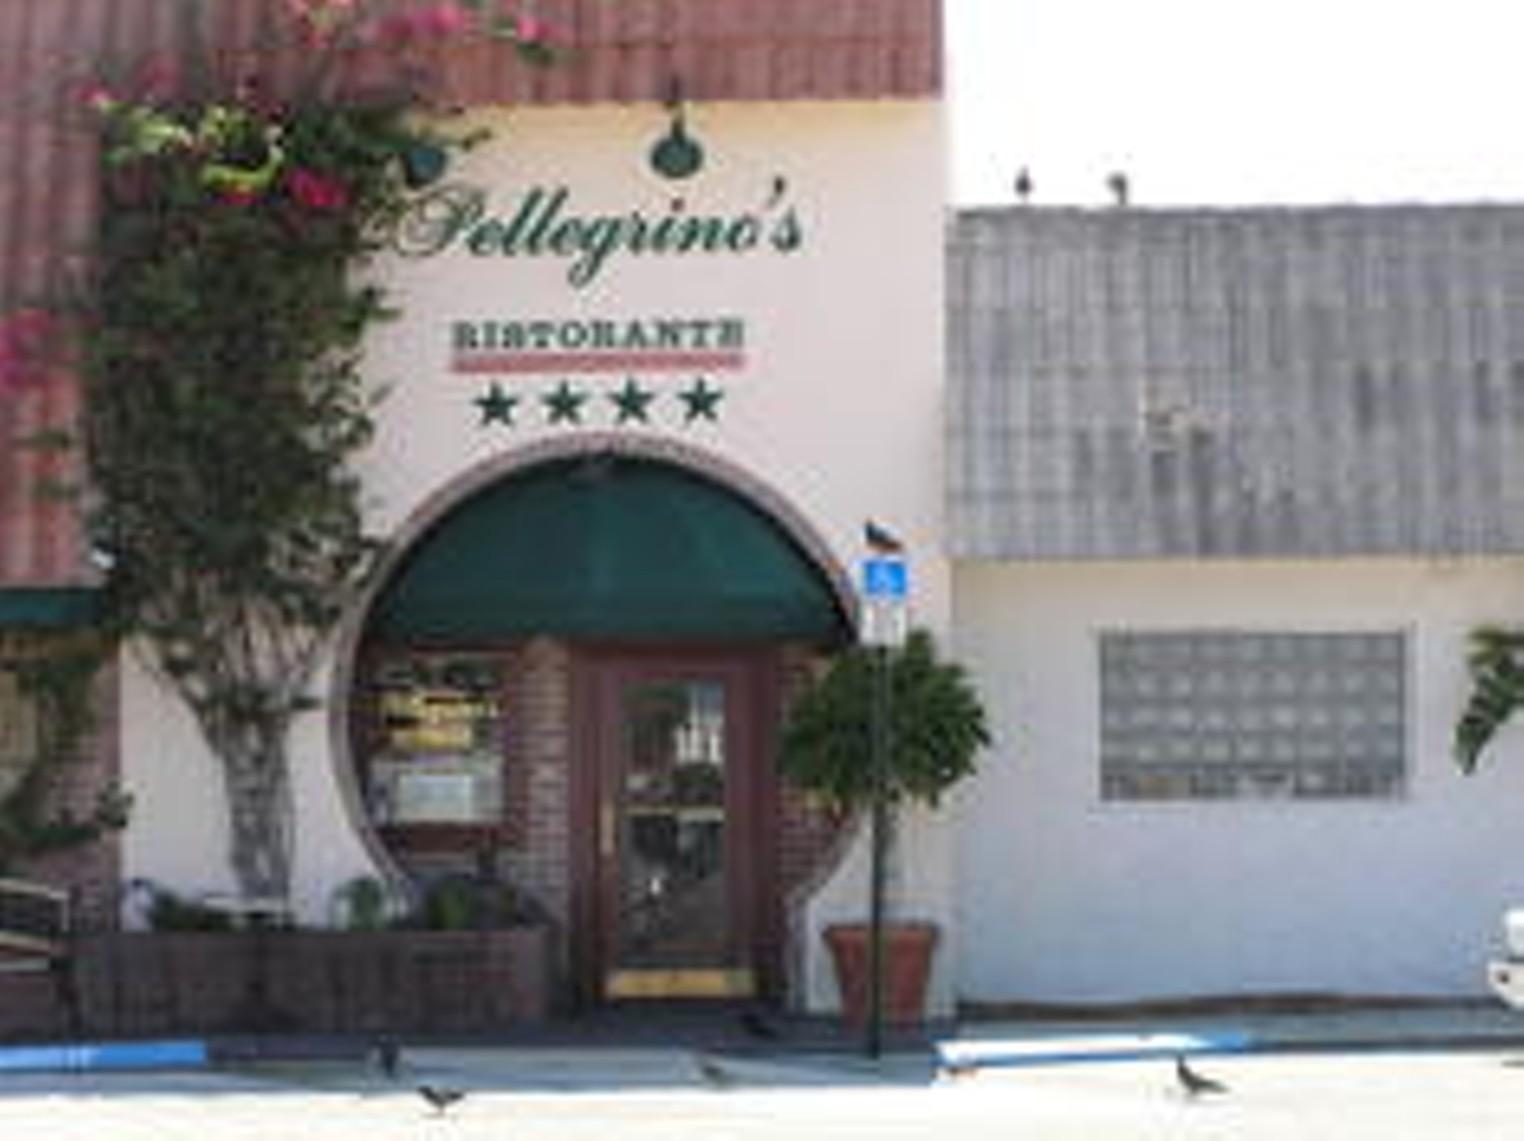 Best Expensive Italian Restaurant 2000 Pellegrinos Ristorante Food and Drink South Florida pic